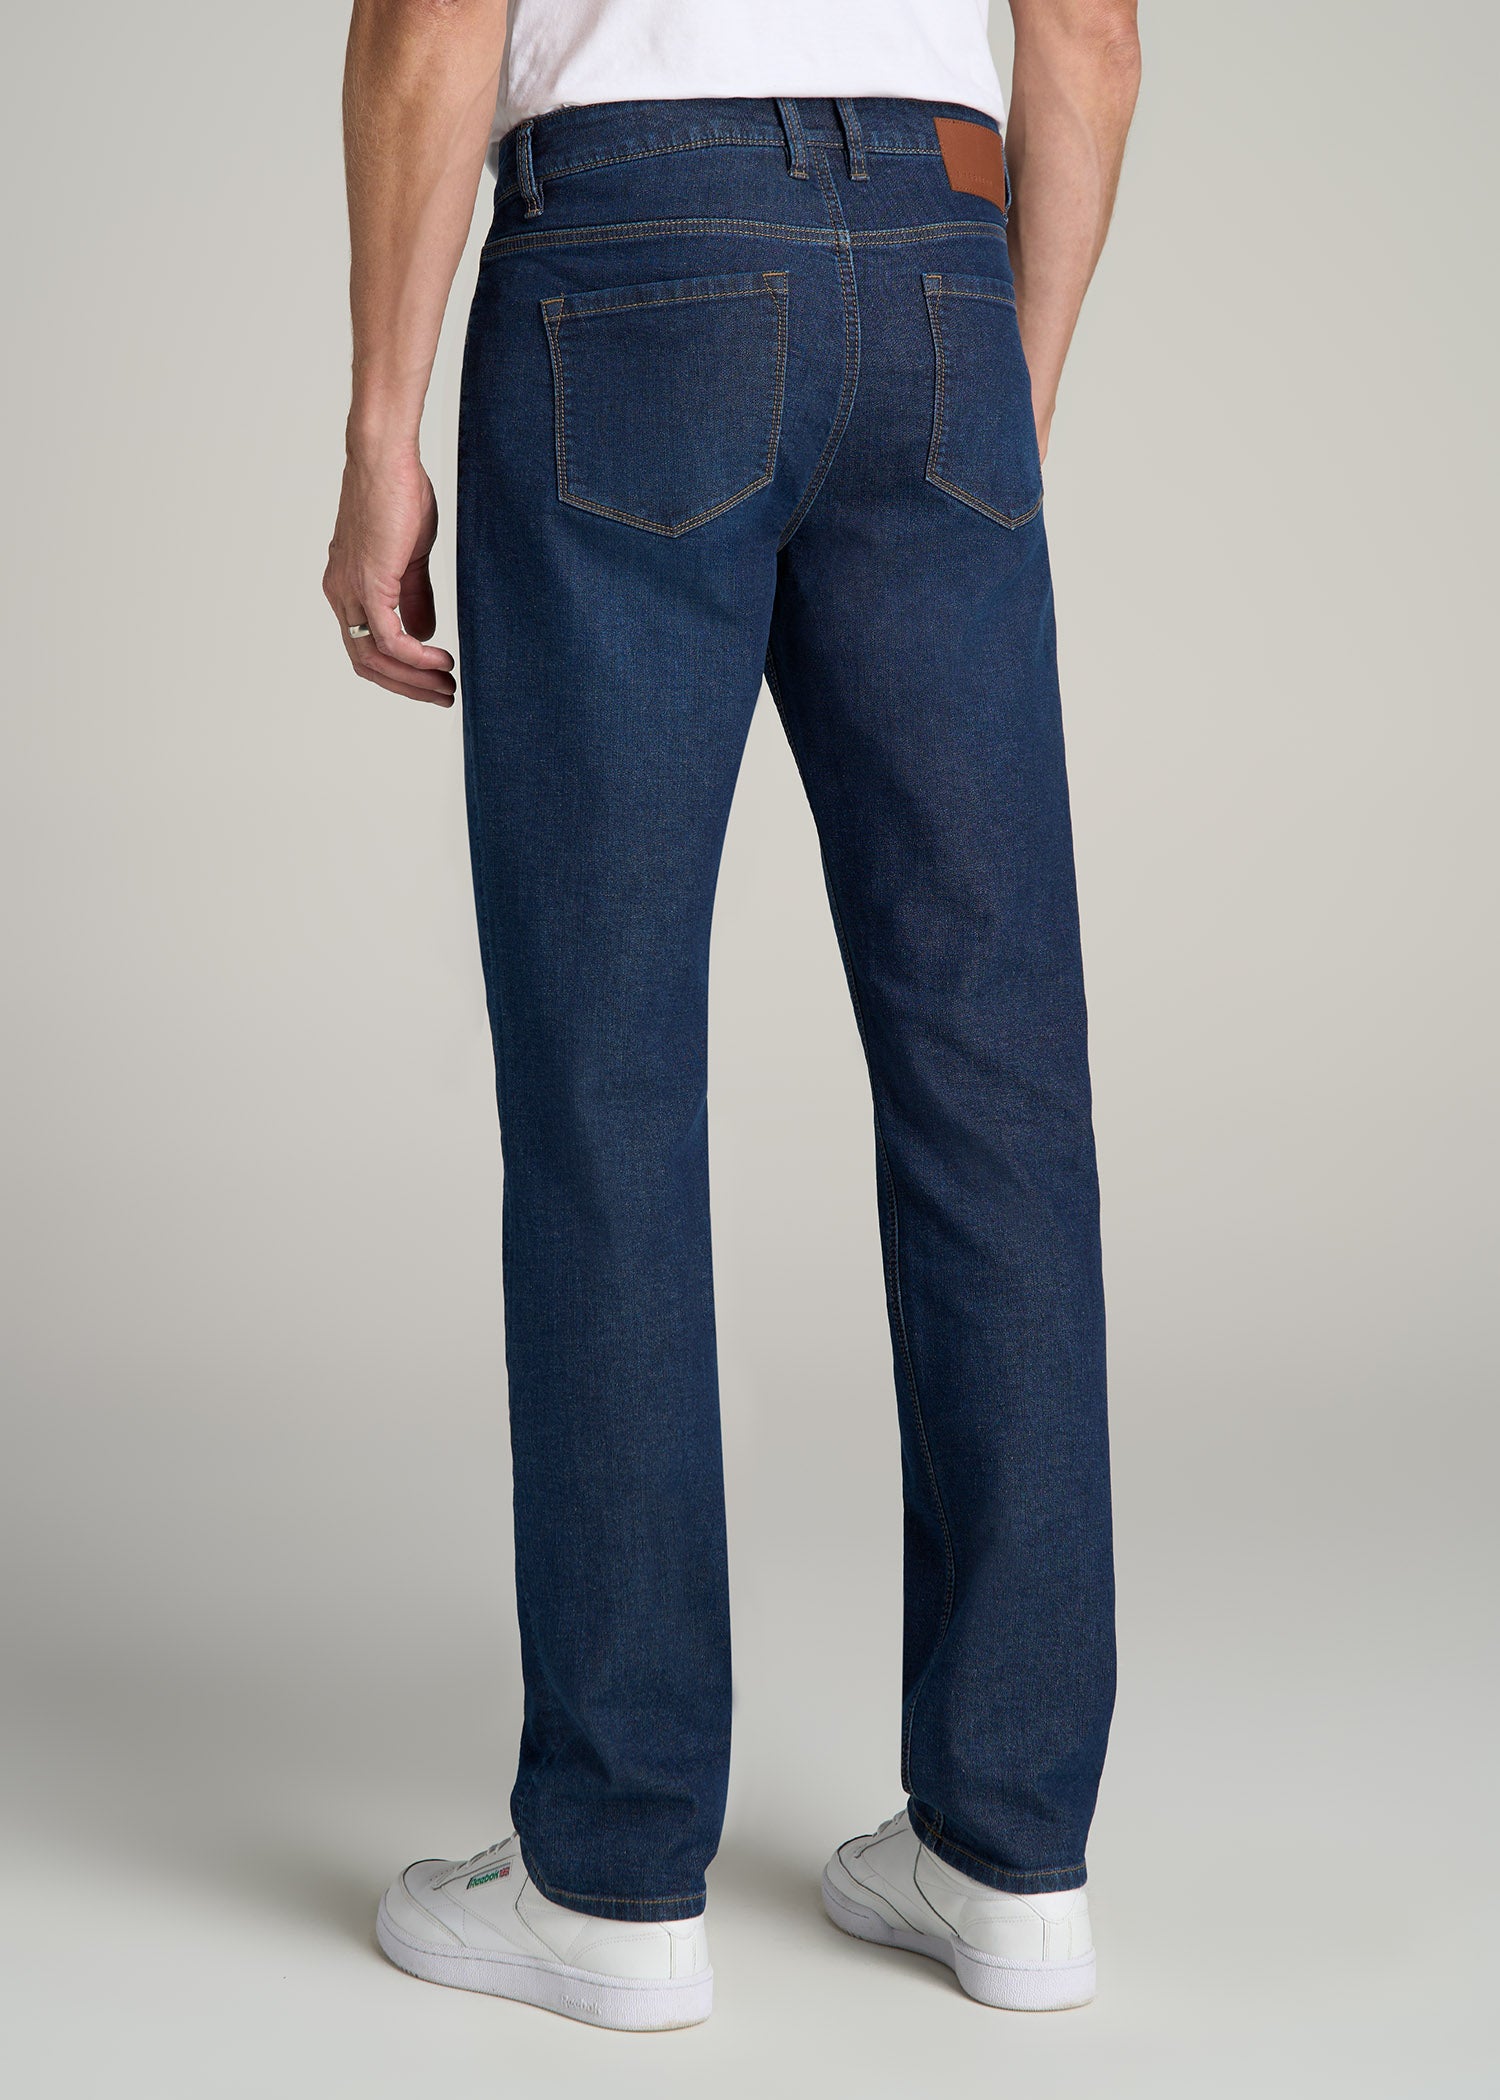 Tall Men's Jeans with Extra Long 36 38 40 Inseams